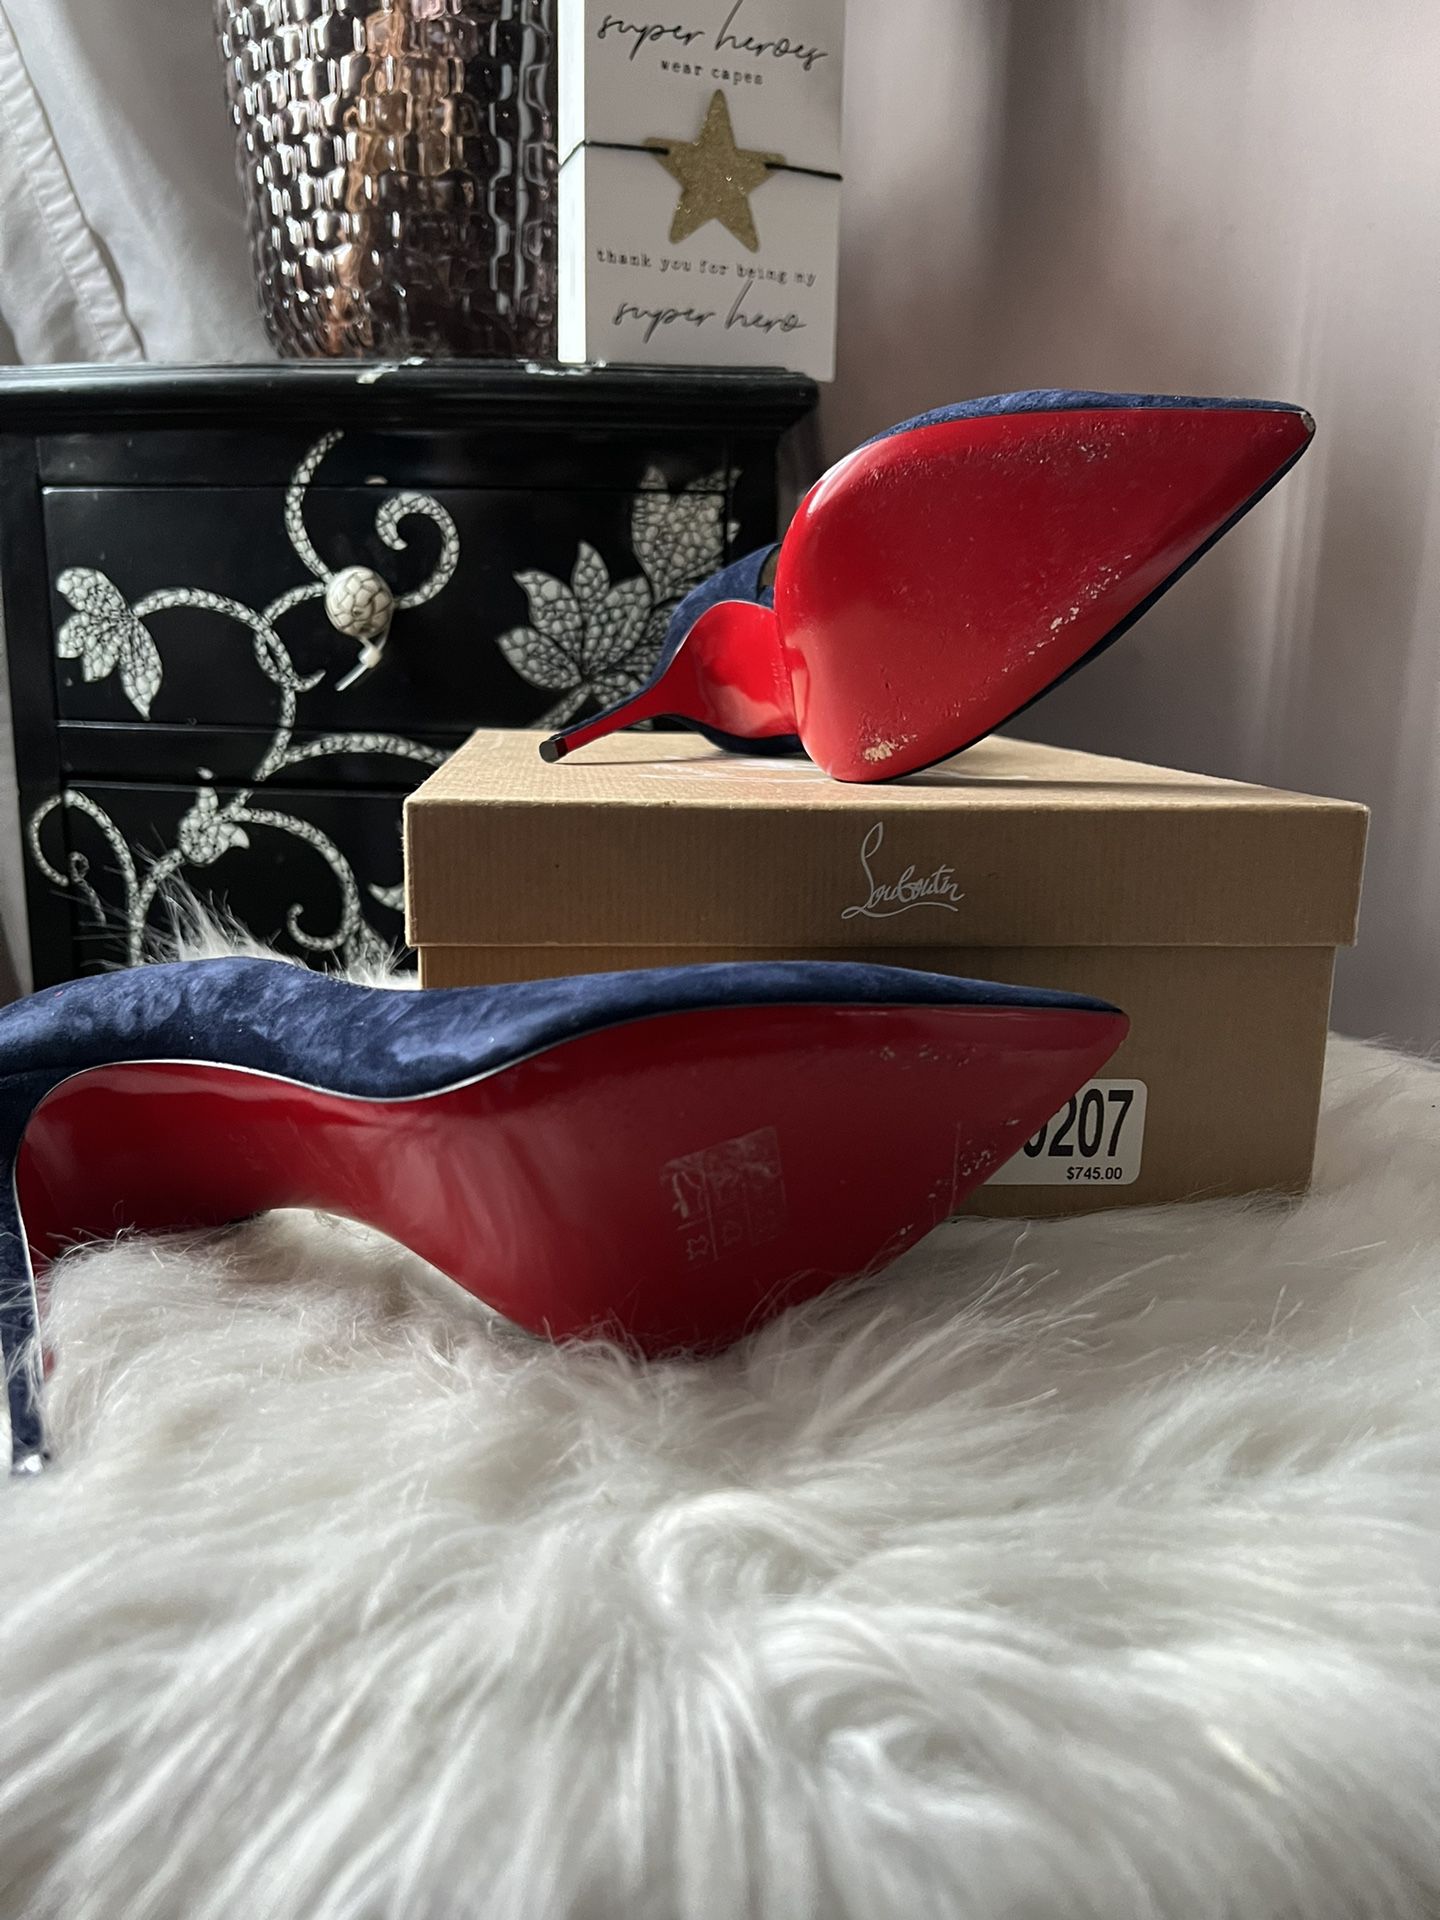 Christian Louboutin Boots for Sale in Jersey City, NJ - OfferUp